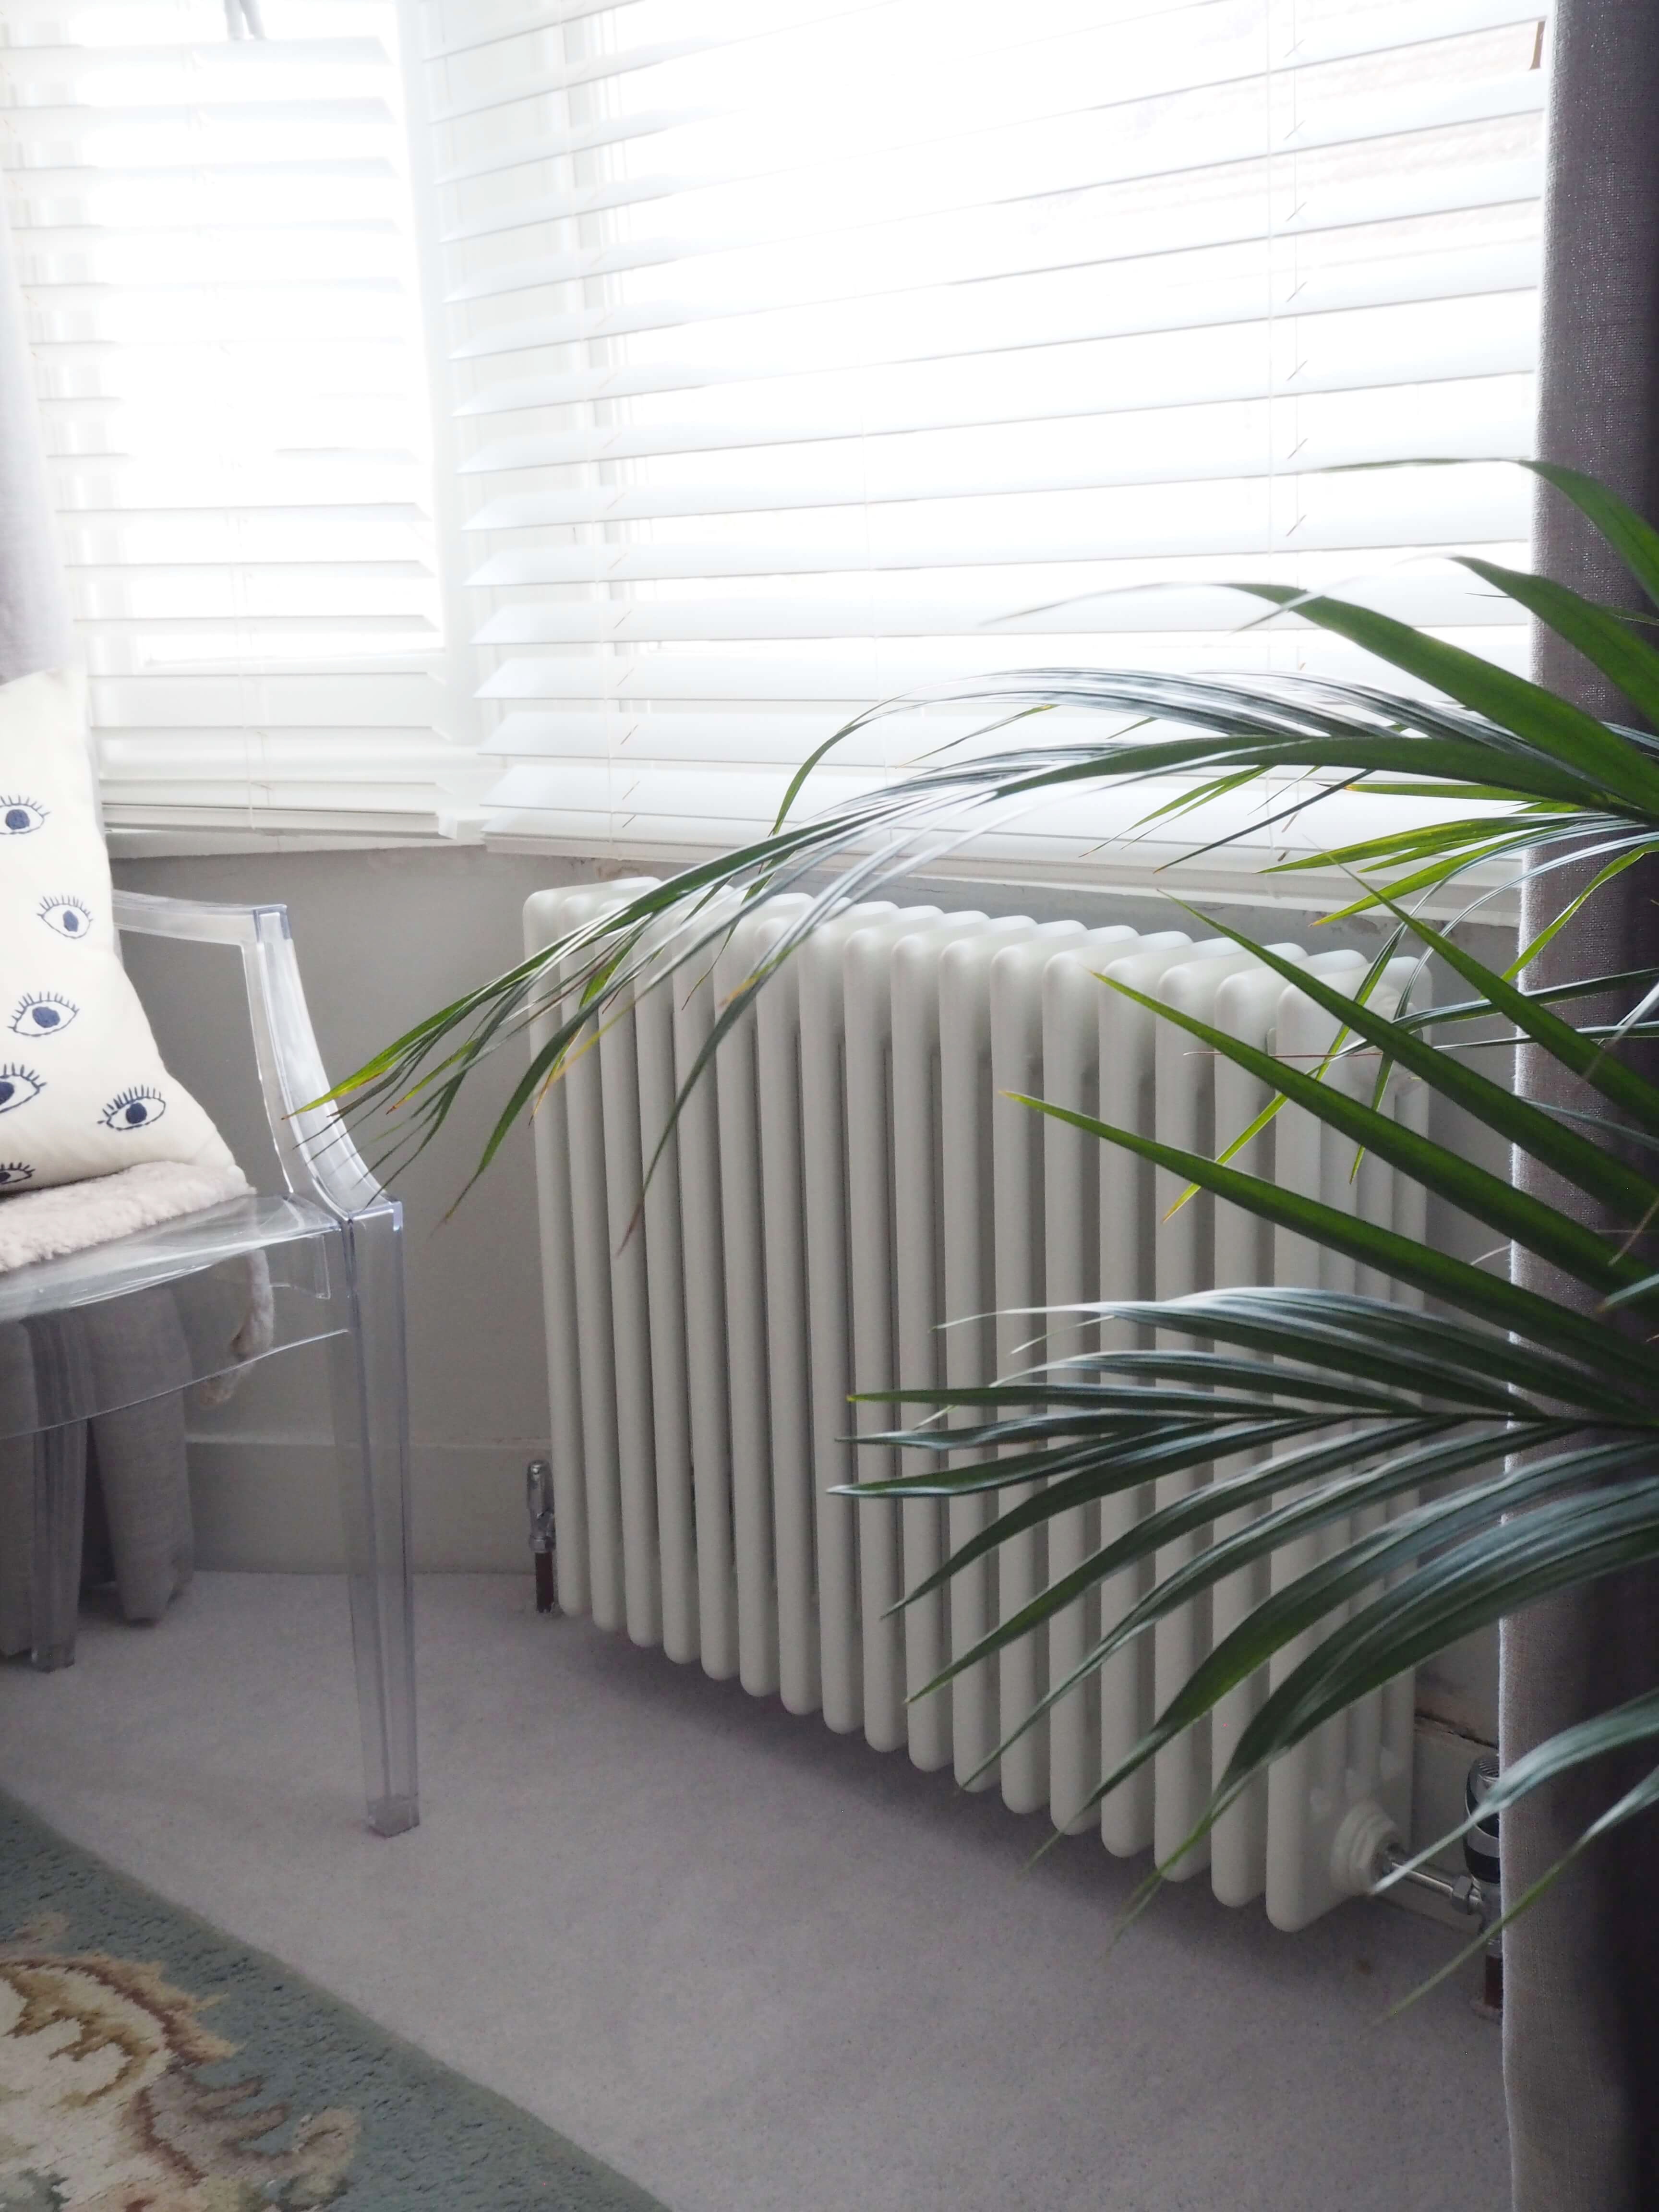 Planning a central heating update? Discover how important BTUs are when picking the right radiator for your home by Homes blogger Maxine Brady